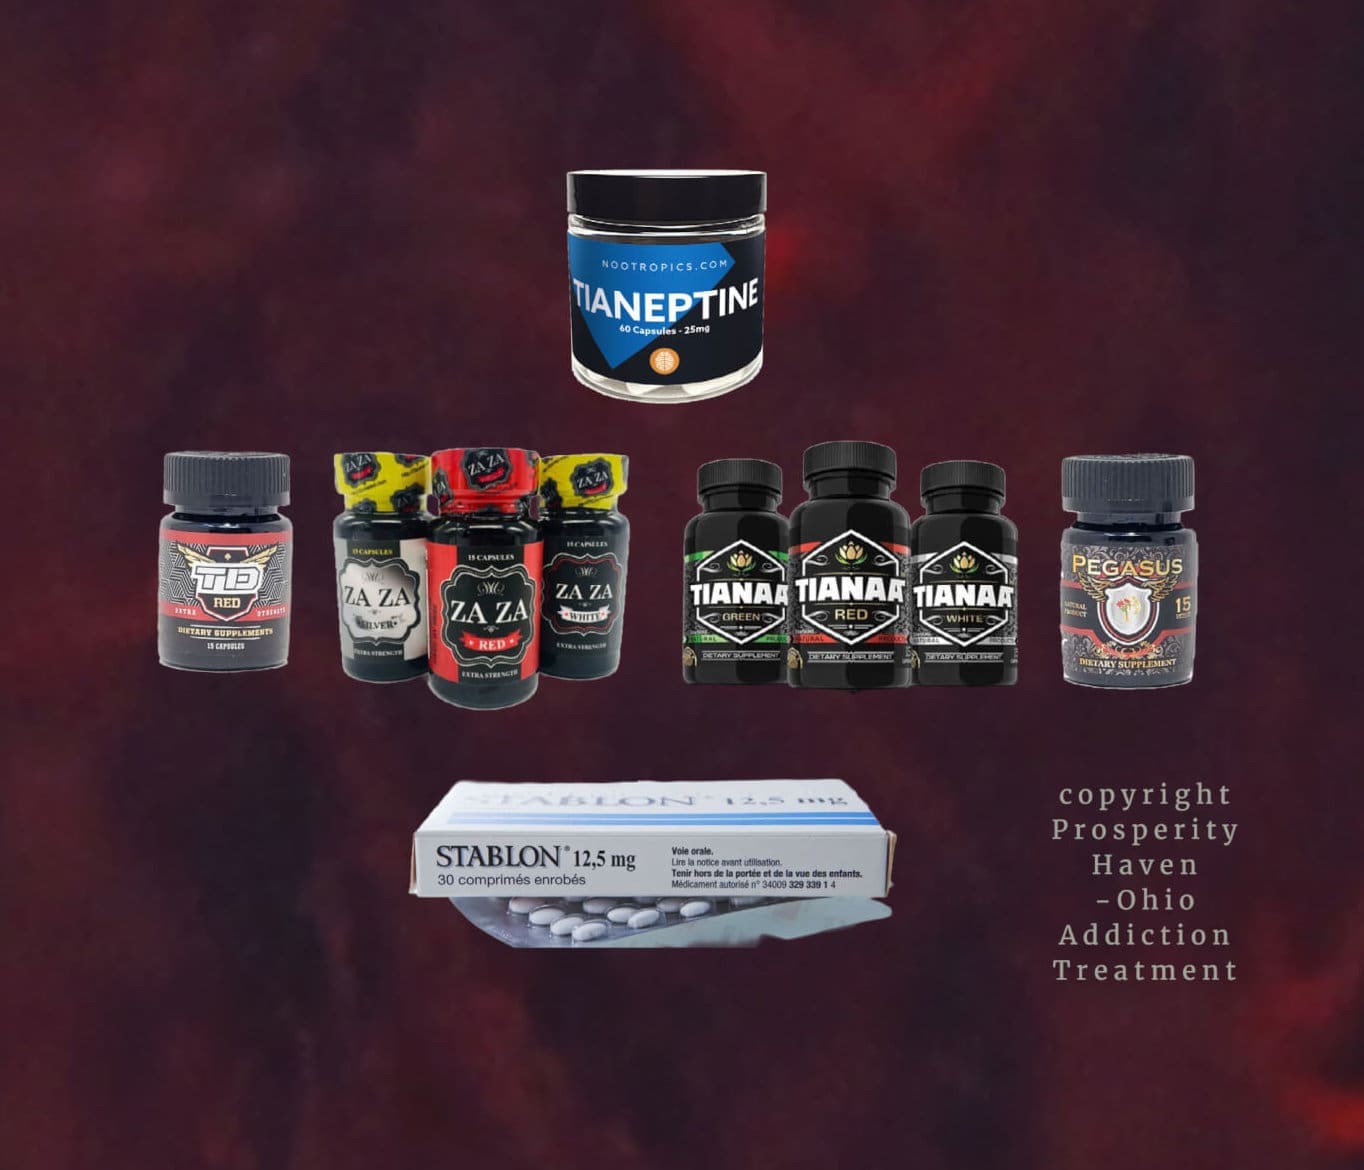 A package of various supplements on a red background, specifically designed for rehab and inpatient treatment.